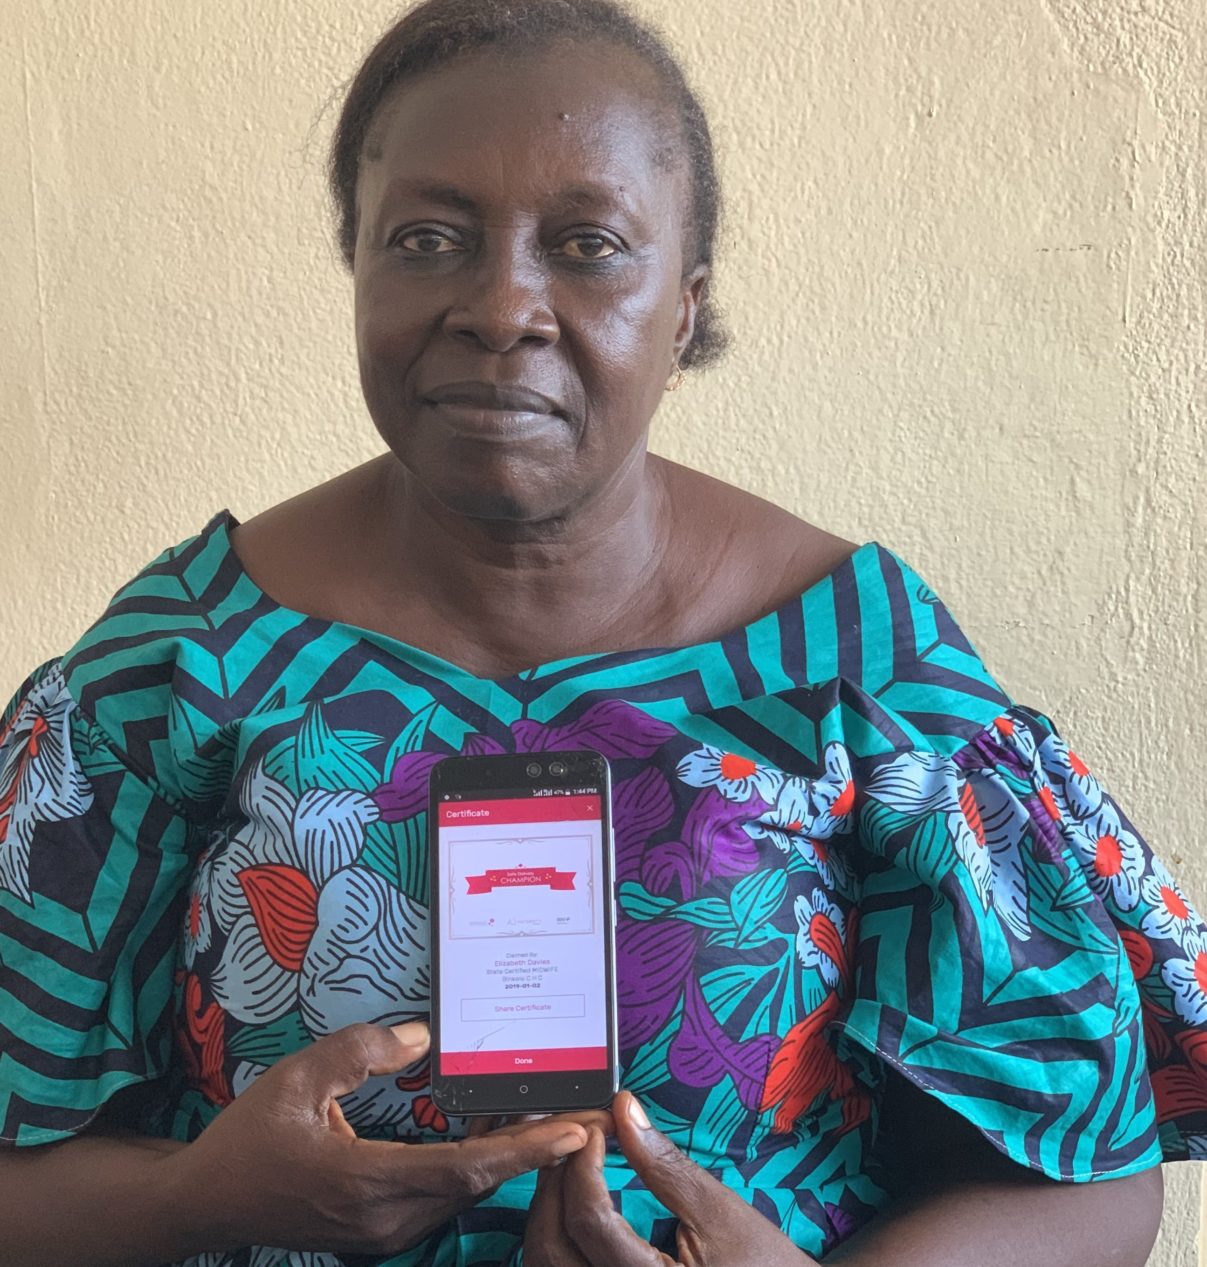 Can an App Save Lives in Childbirth? Key learnings of implementing tech solutions into maternal health programs